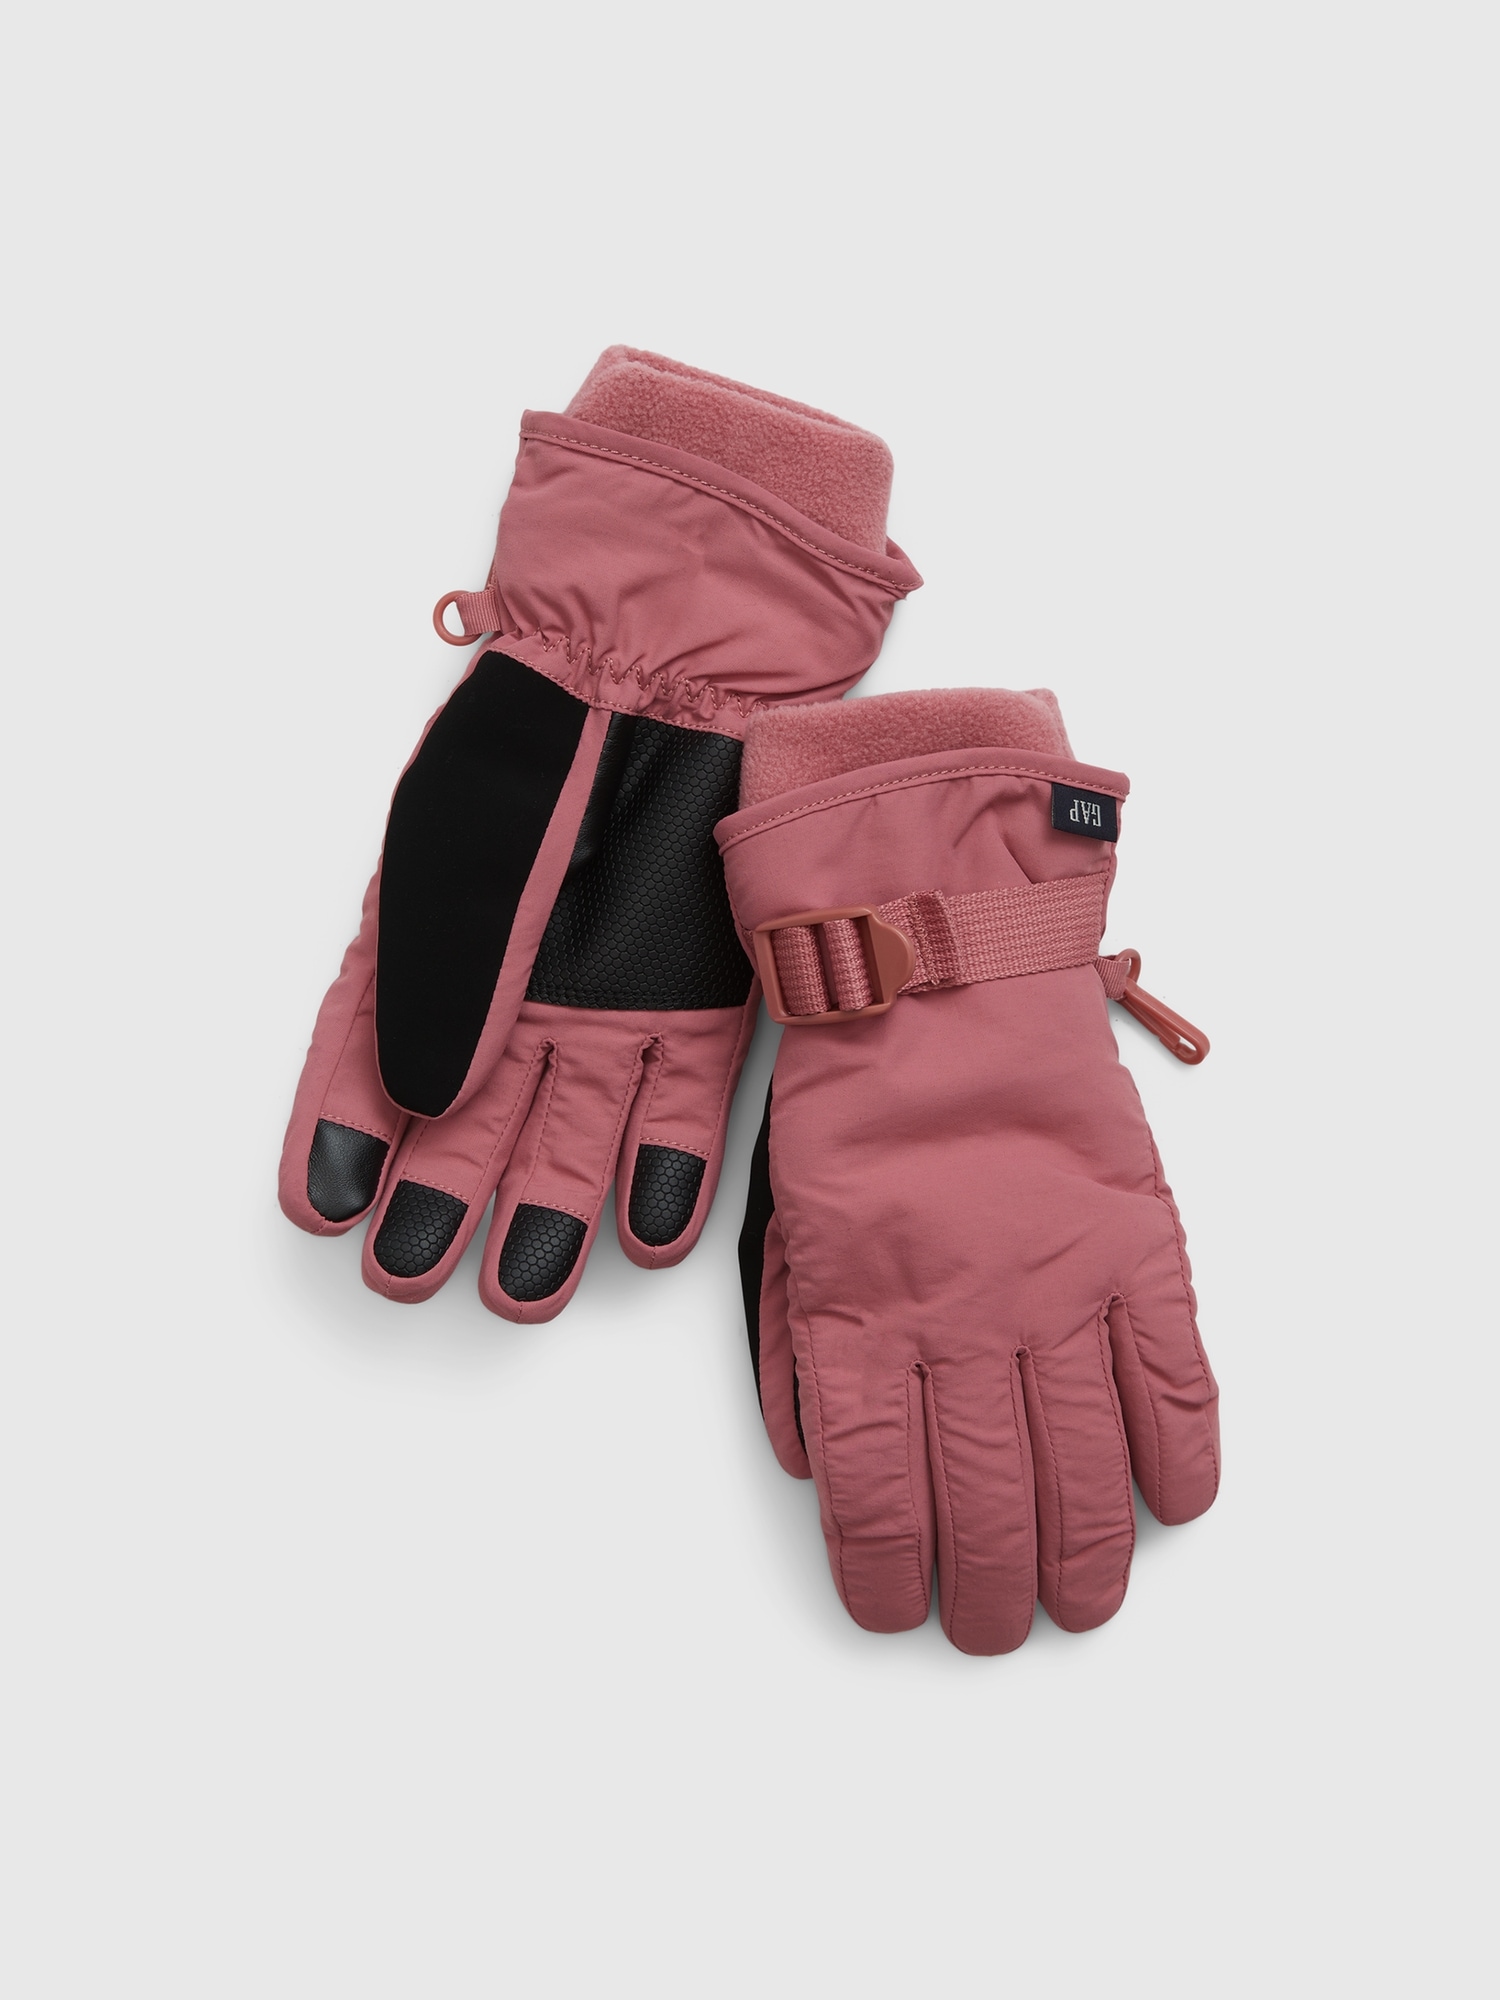 Gap Kids Recycled Snow Gloves